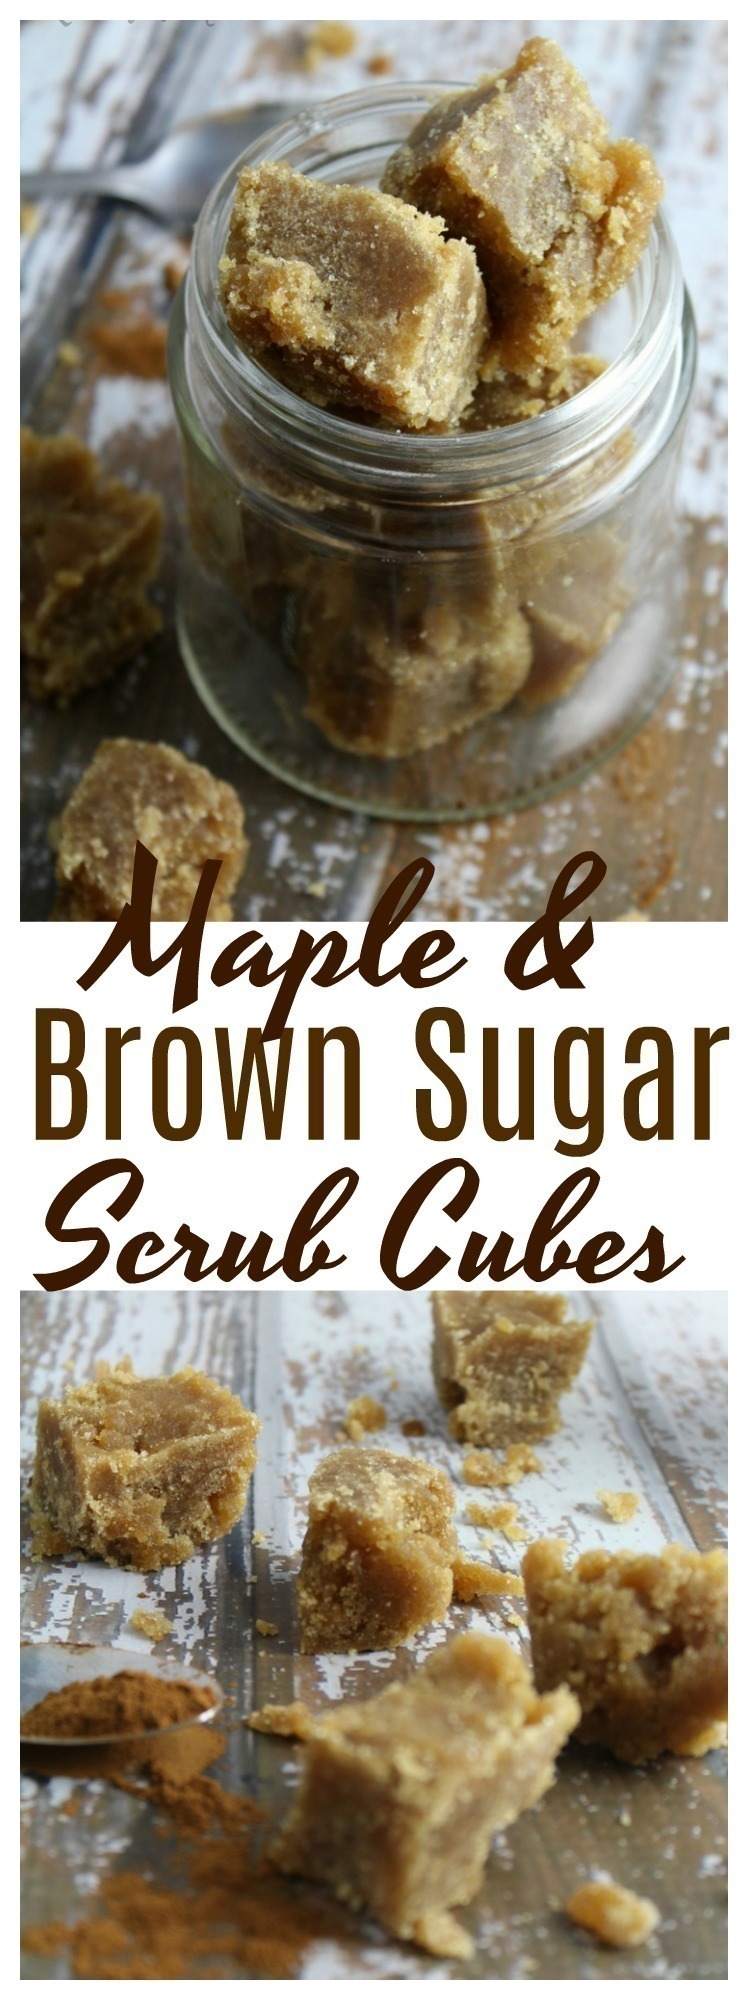 These Maple and Brown Sugar Scrub Cubes are wonderful for exfoliating dull, dry skin, easy to make, and are great to give as gifts!